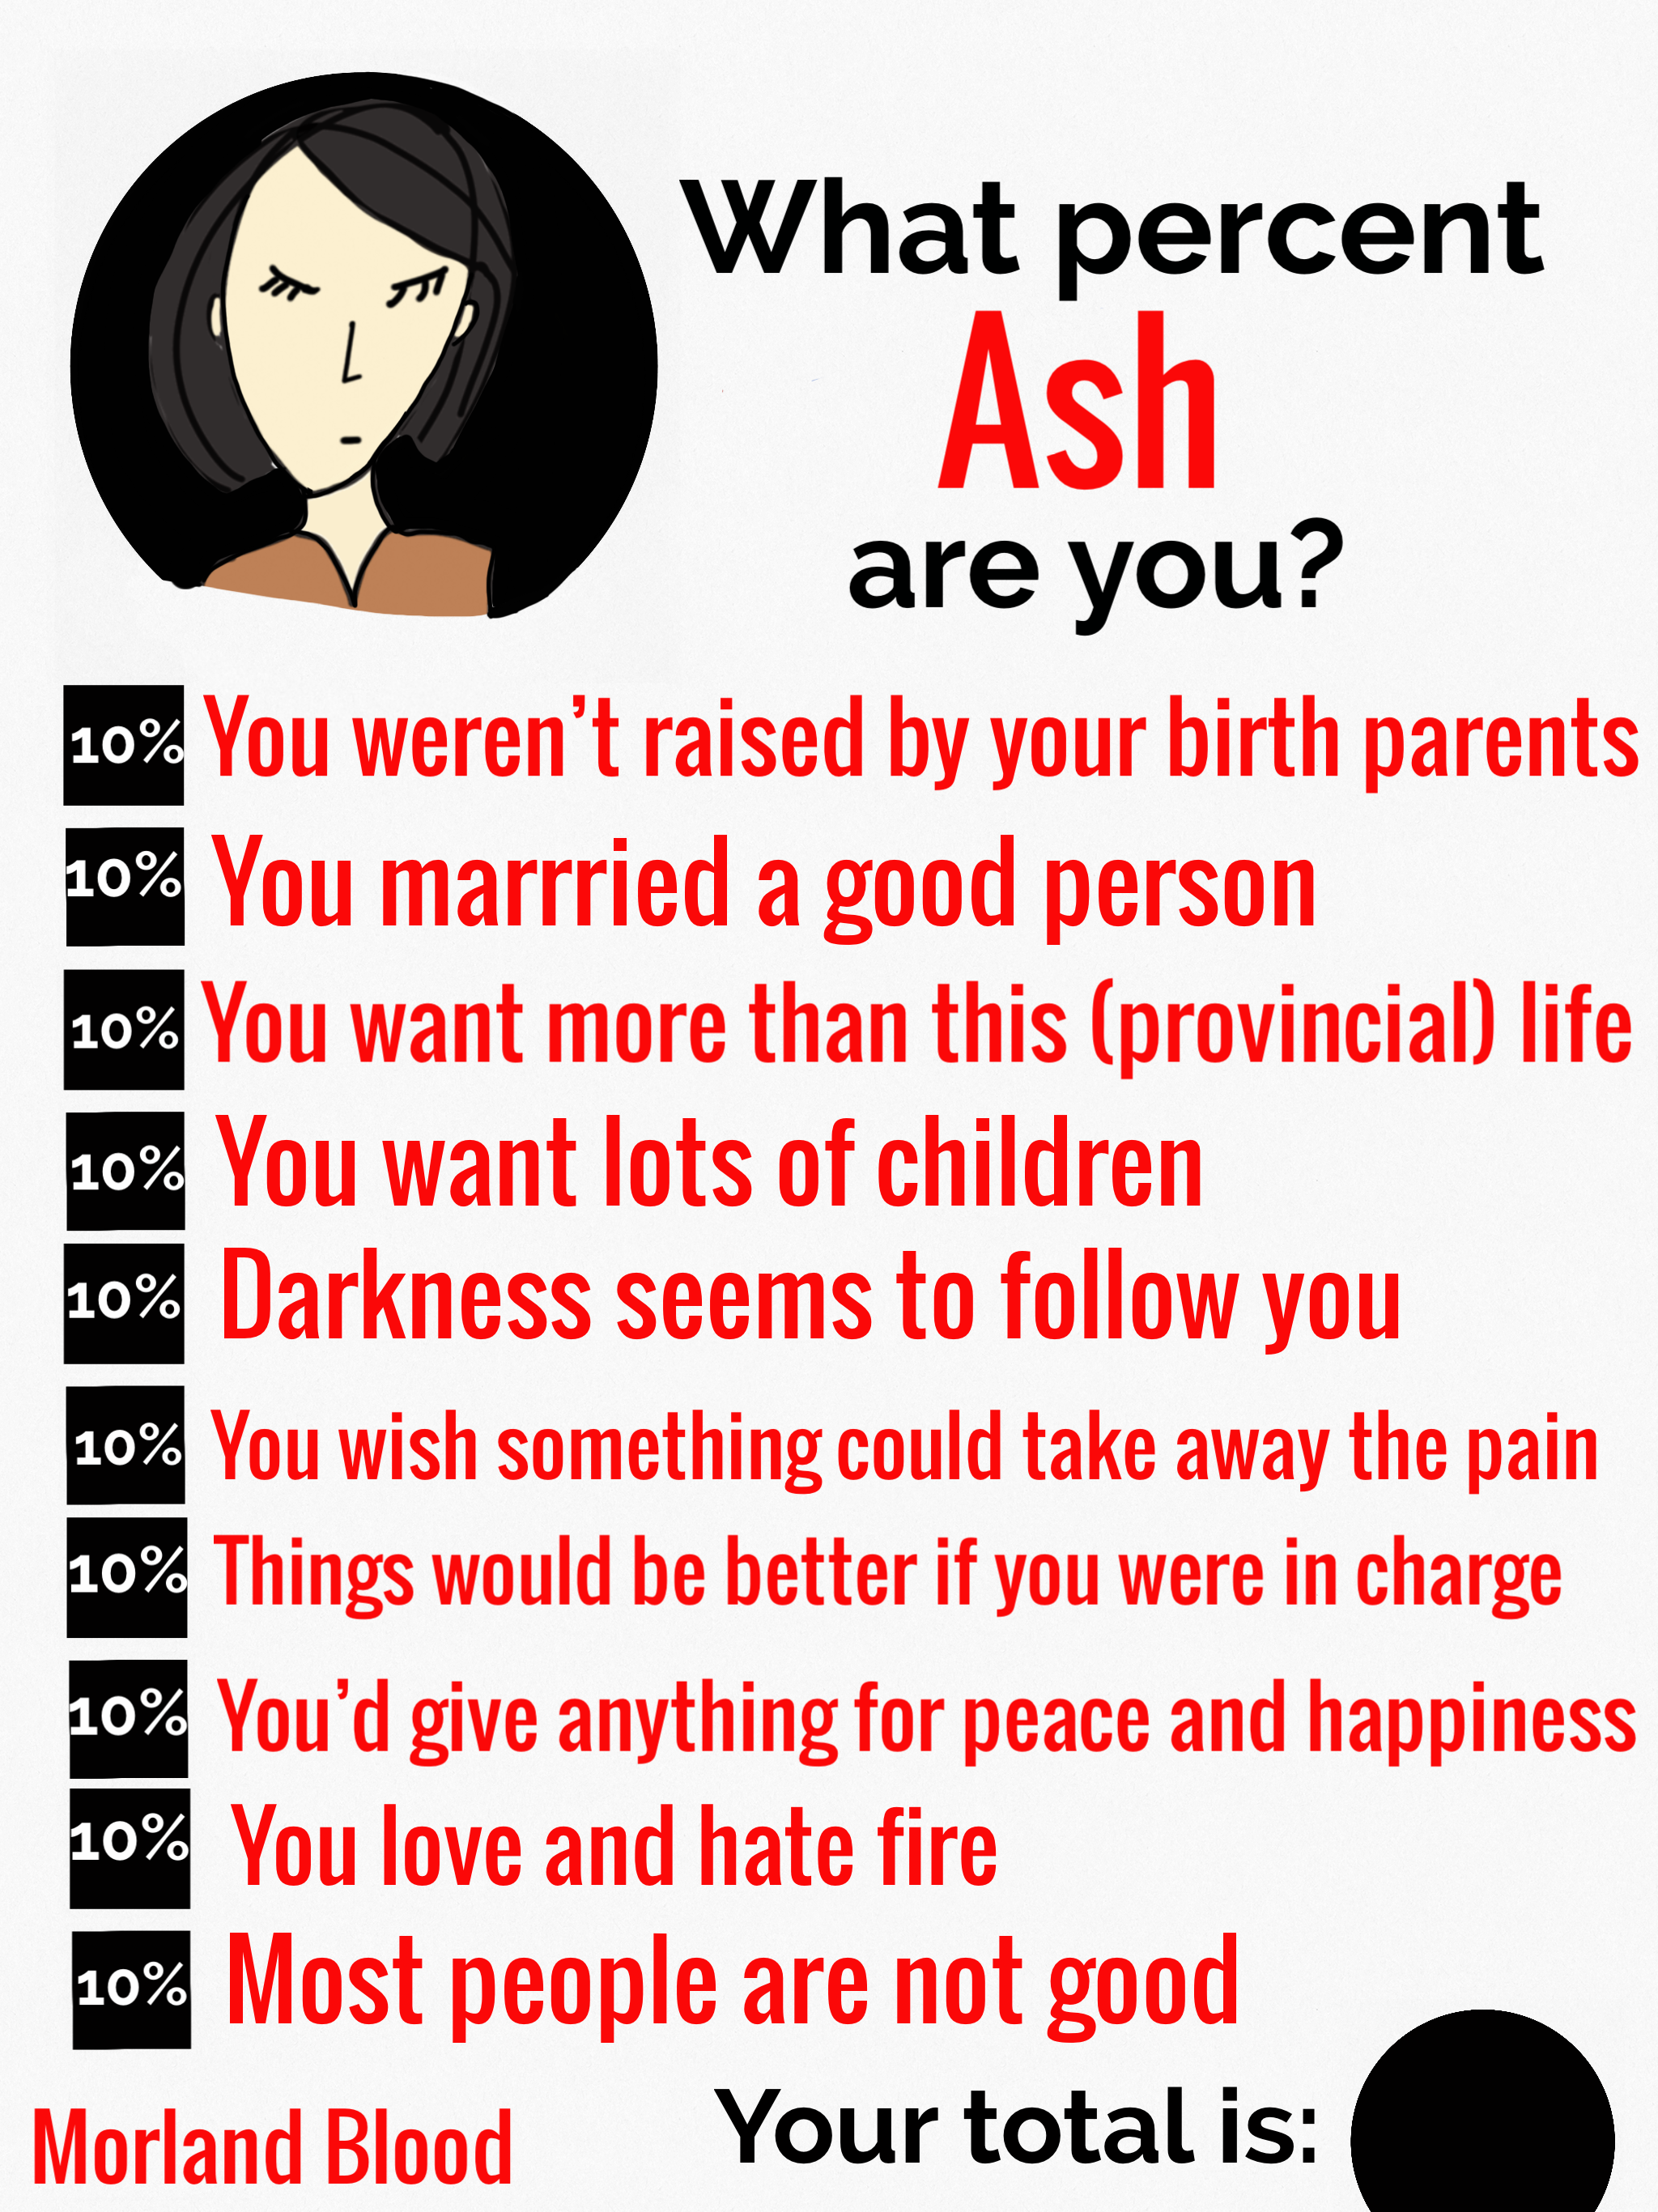 ash-personality-quiz.png